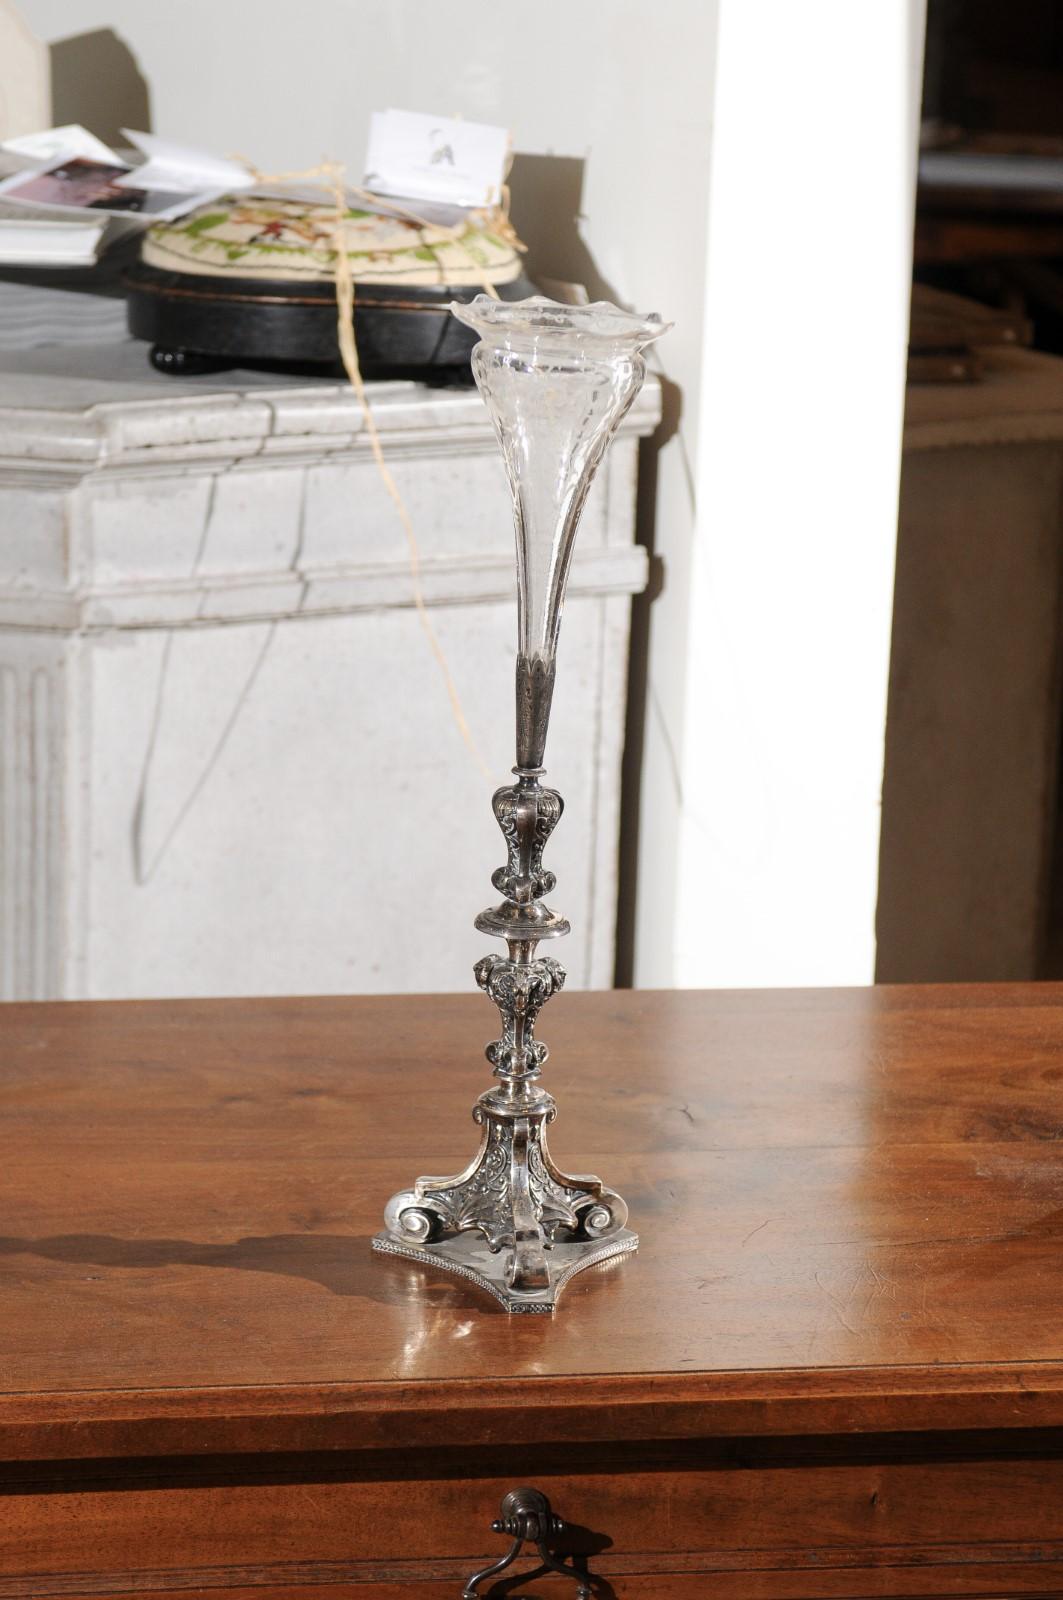 An English late Victorian epergne from the 19th century, with silver base and crystal vase. Born in England during the second half of the 19th century, this exquisite centerpiece features a Rococo inspired silver candlestick with scrolling motifs,